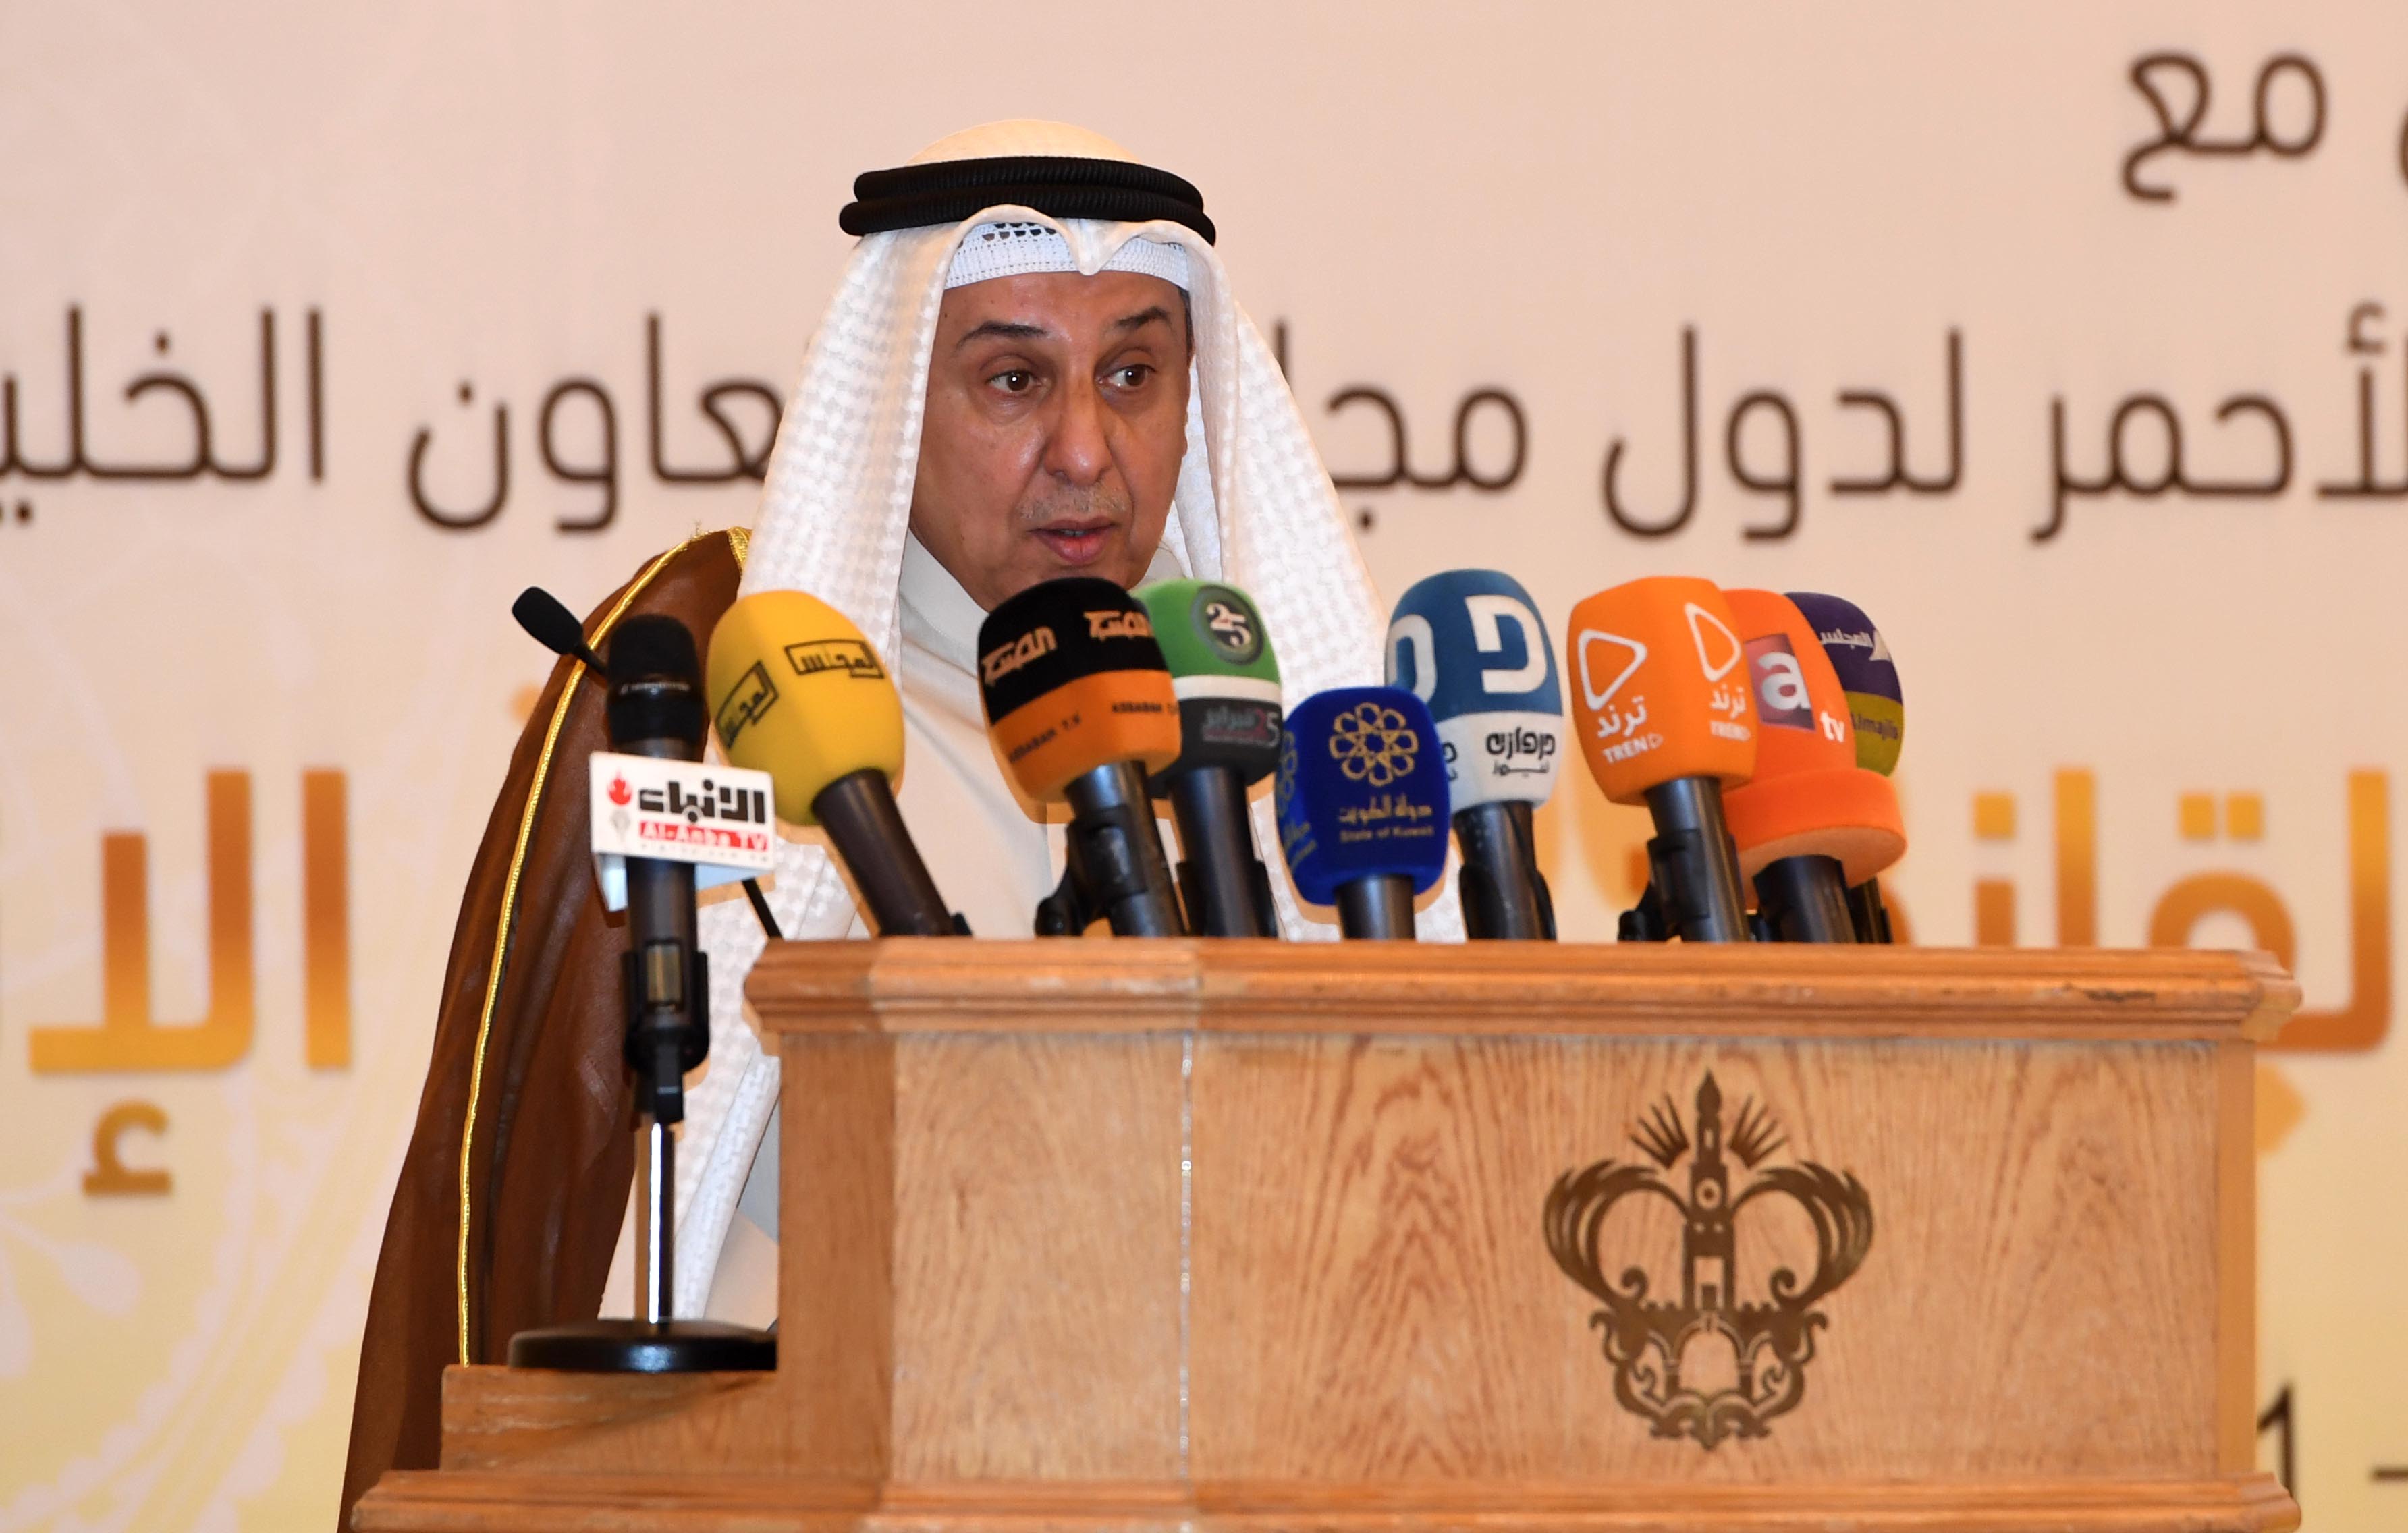 chairman of the Court of Appeals Justice Mohammad bin Naji speech at the International Humanitarian Law Conference